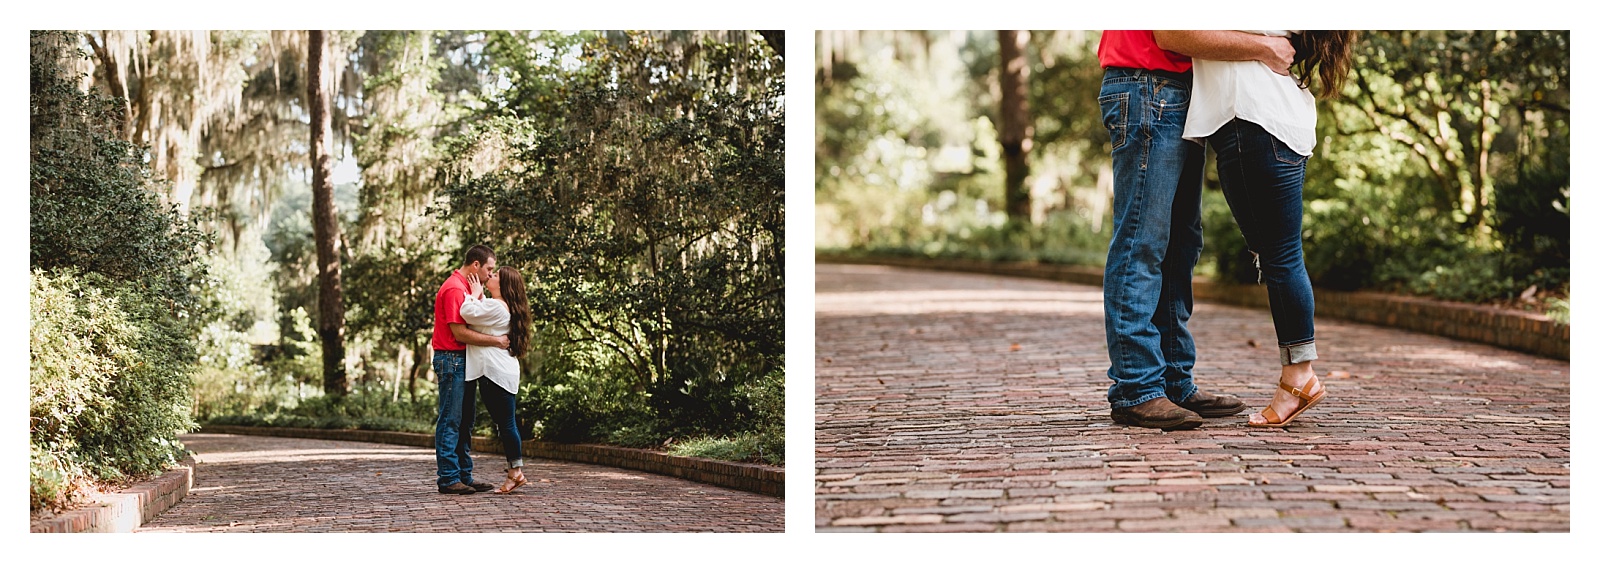 Professional engagement pictures in Tallahassee, Florida. Shelly Williams Photography